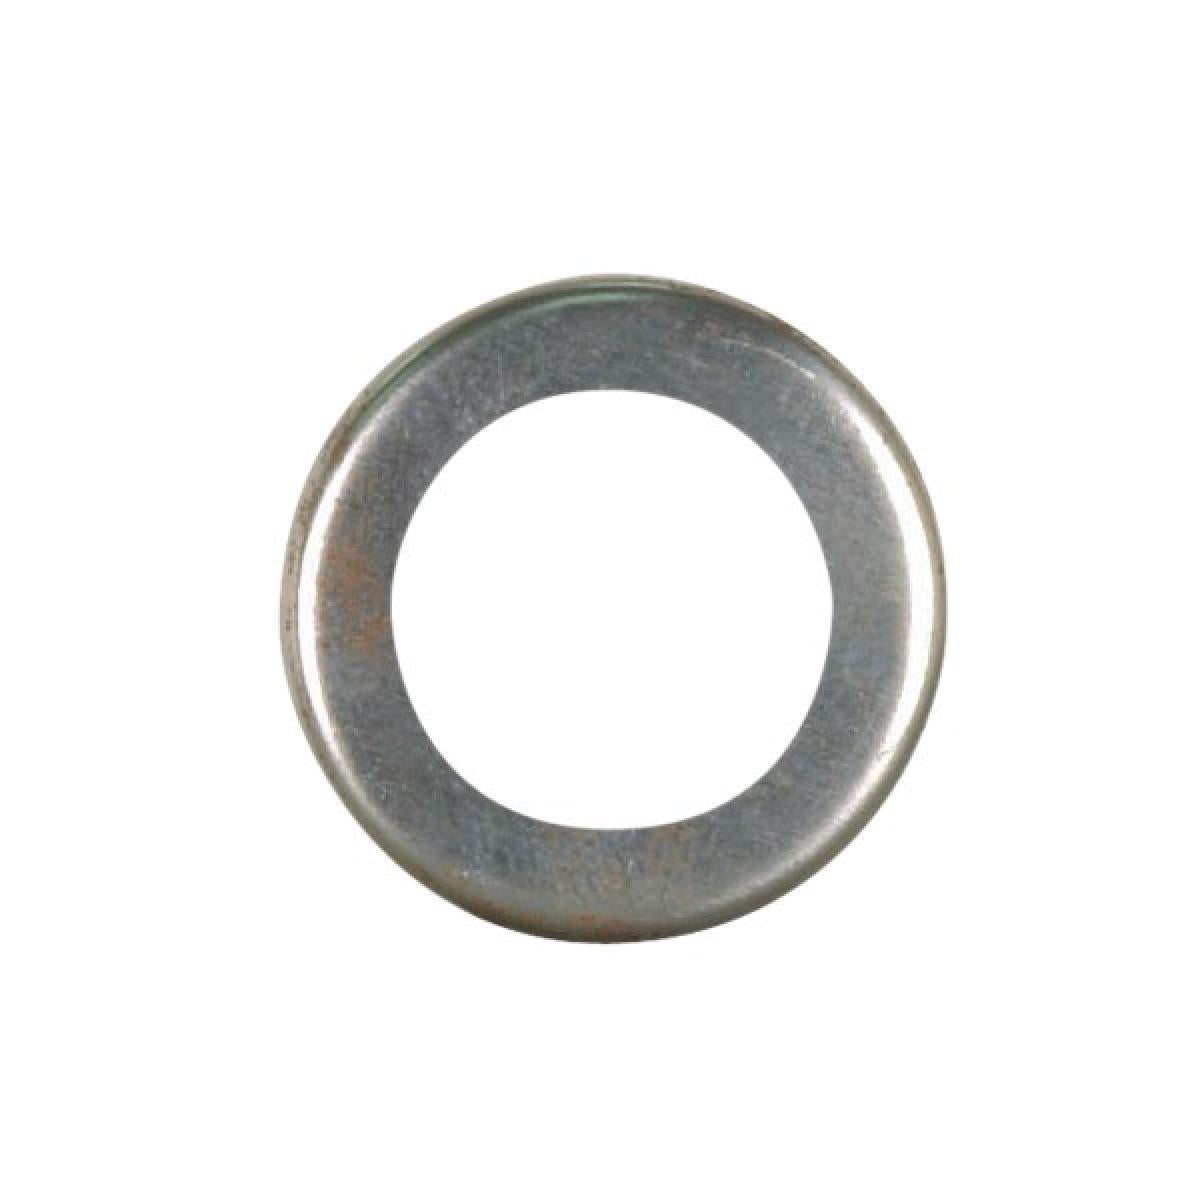 Satco 90-2060 Steel Check Ring Curled Edge 1/4 IP Slip Unfinished 1-1/4" Diameter